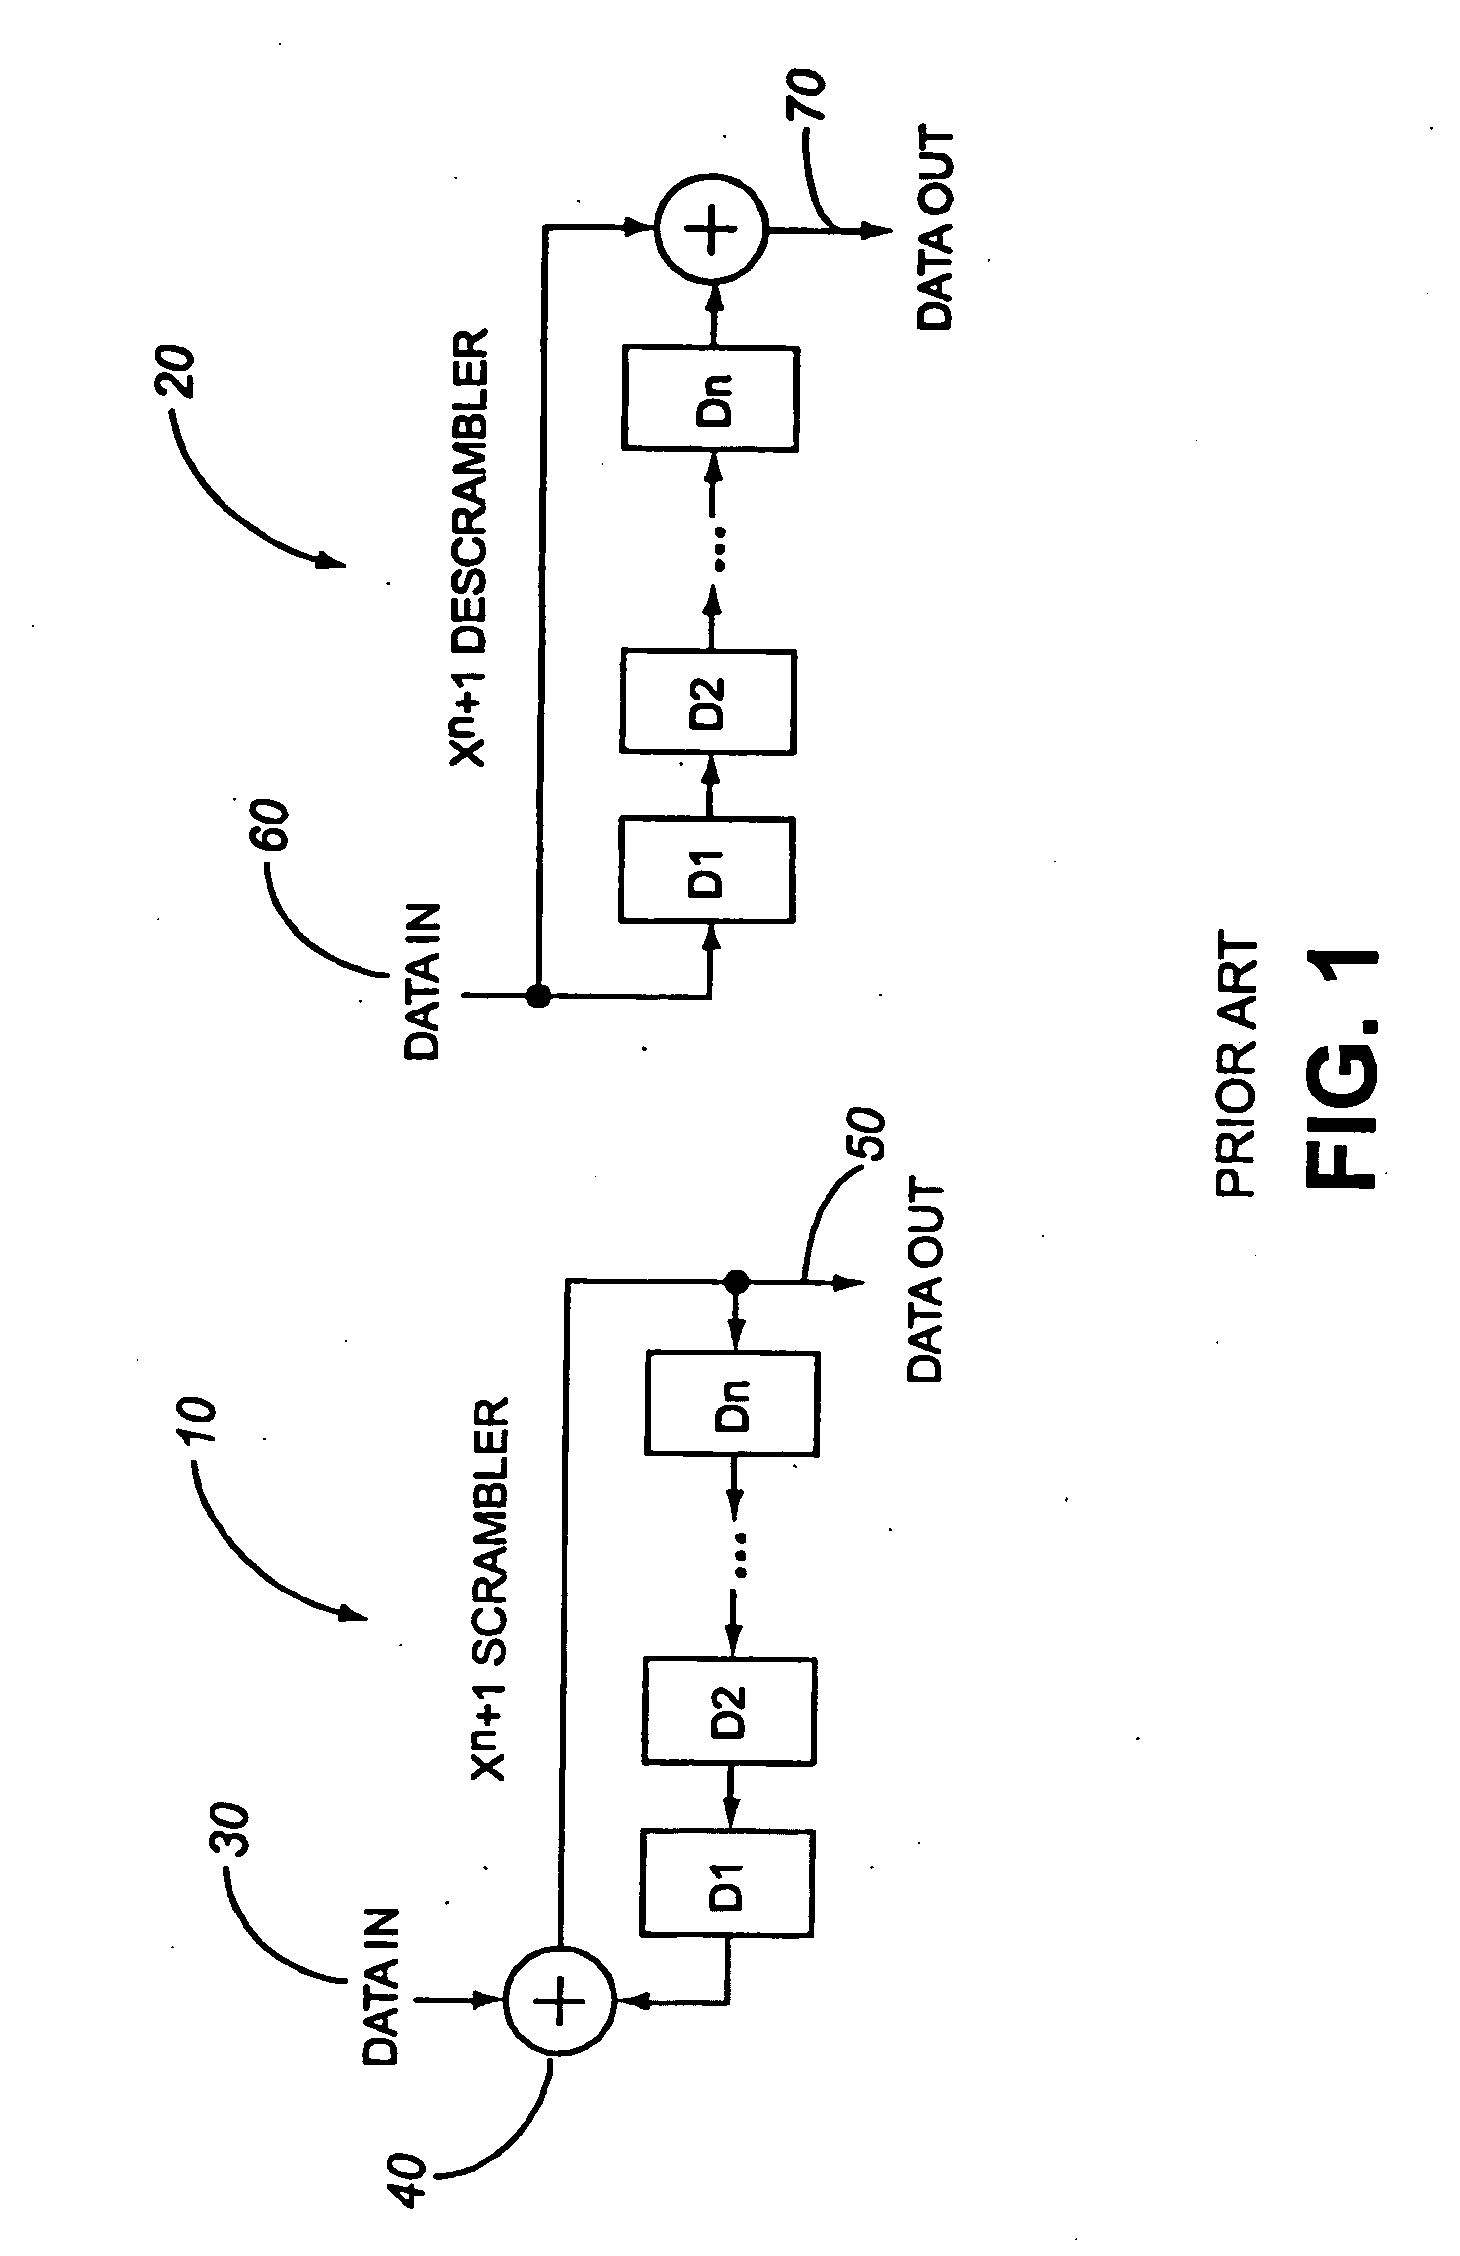 Cyclic redundancy check circuit for use with self-synchronous scramblers